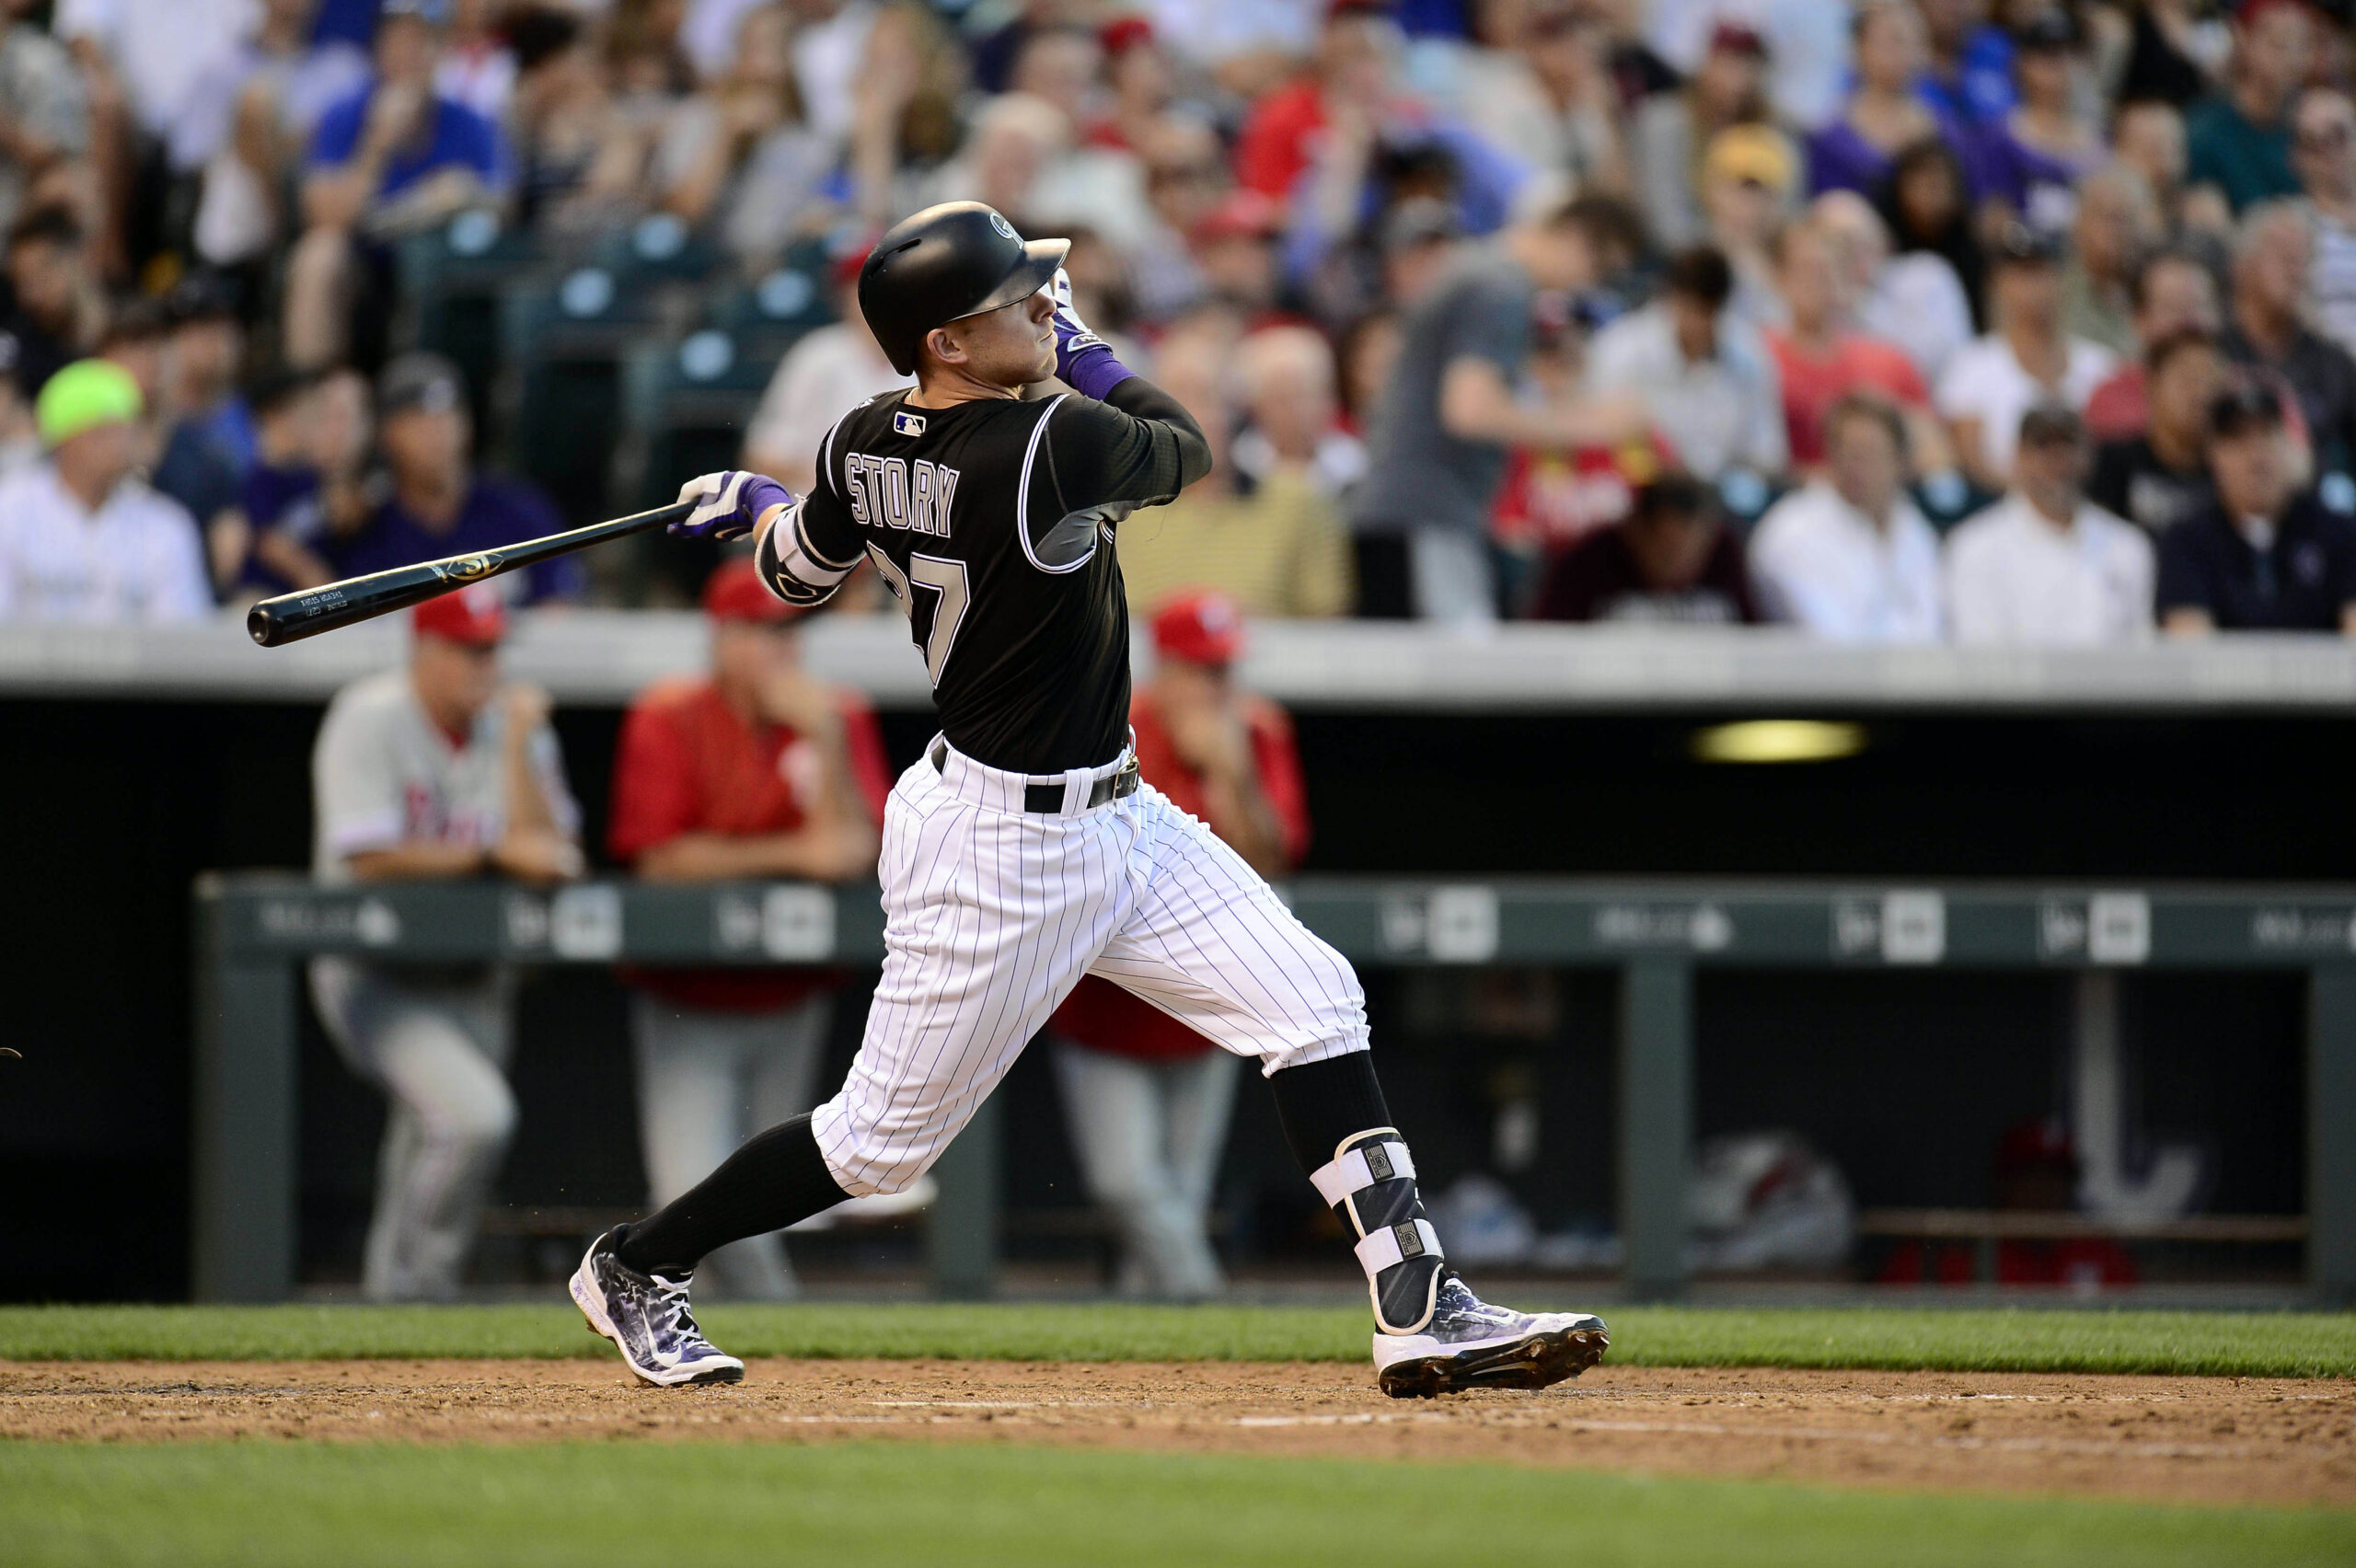 Trevor Story will try to prove he can hit away from Coors Field